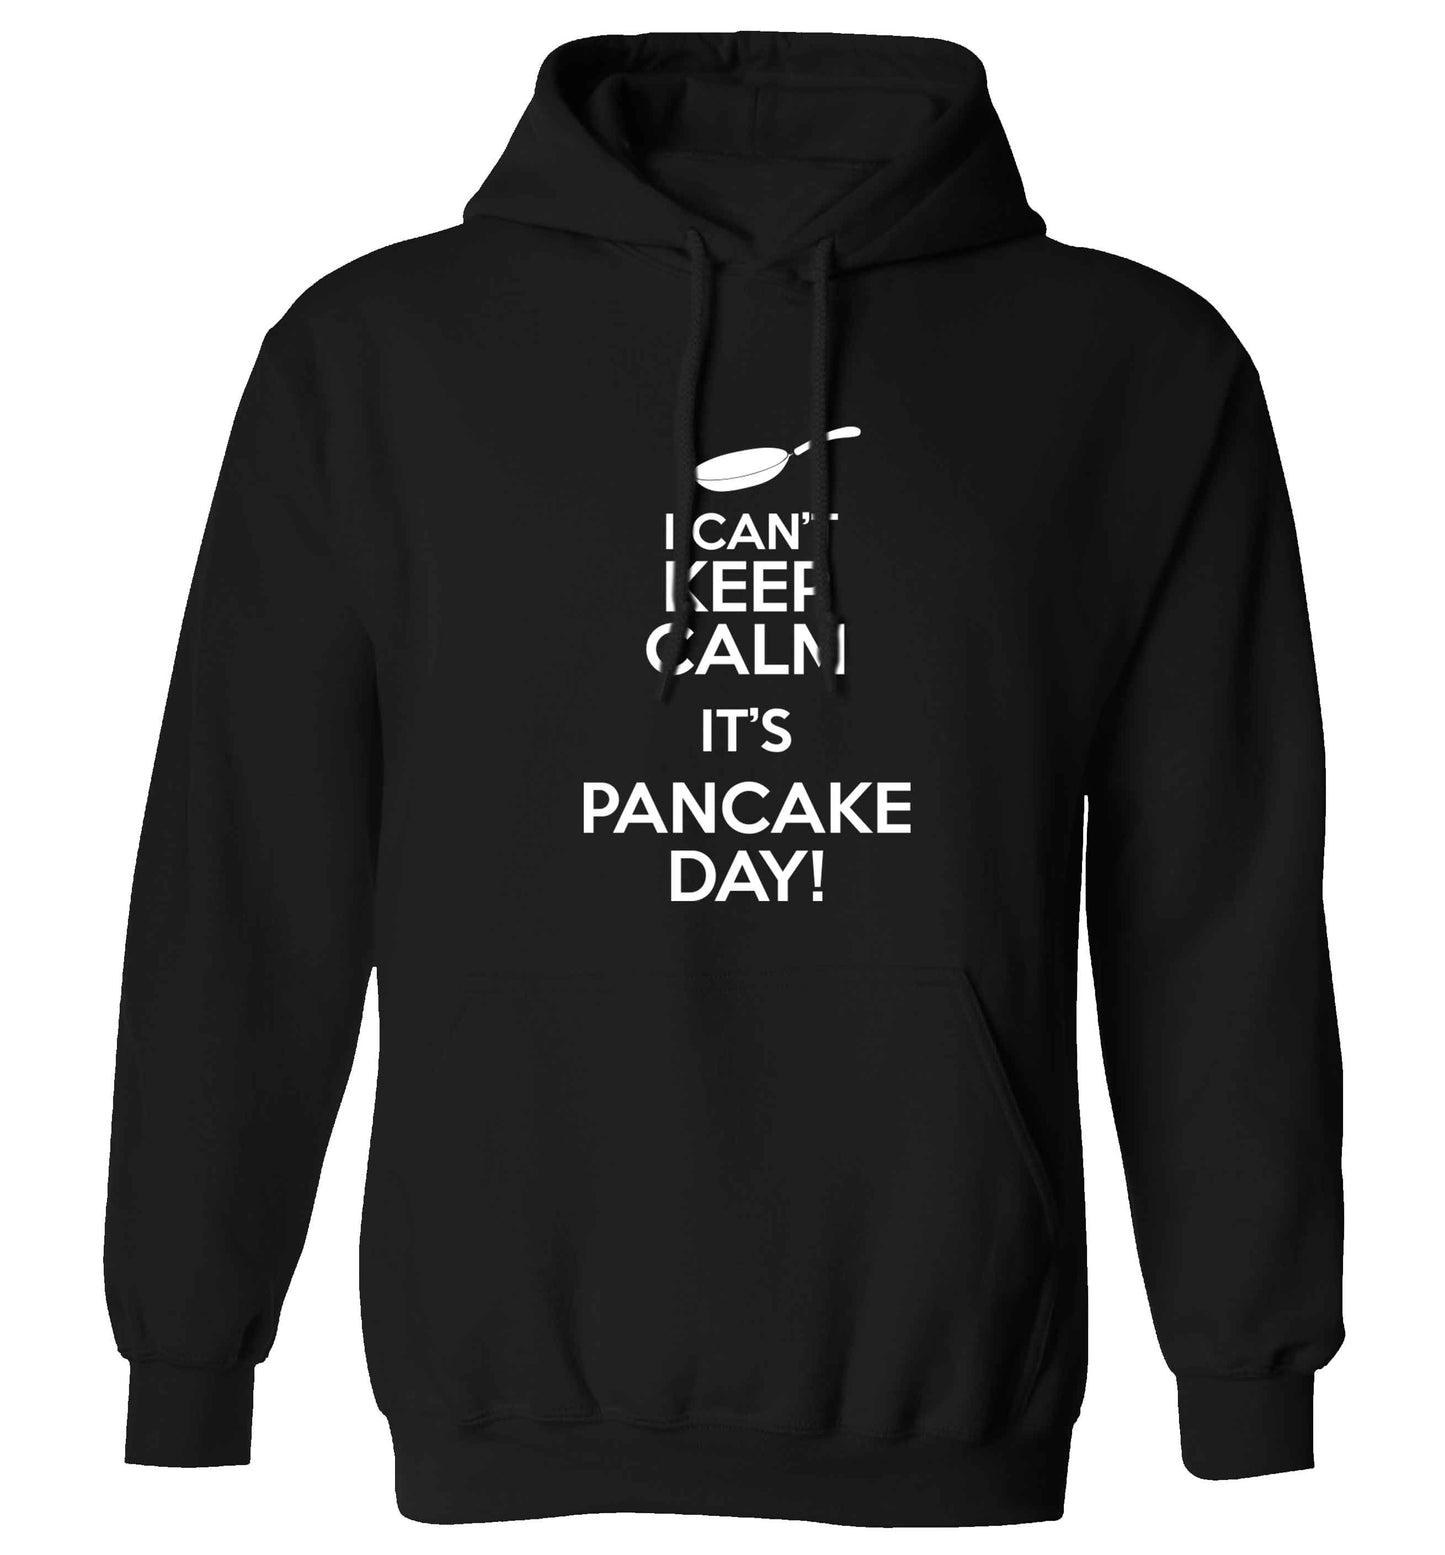 I can't keep calm it's pancake day! adults unisex black hoodie 2XL